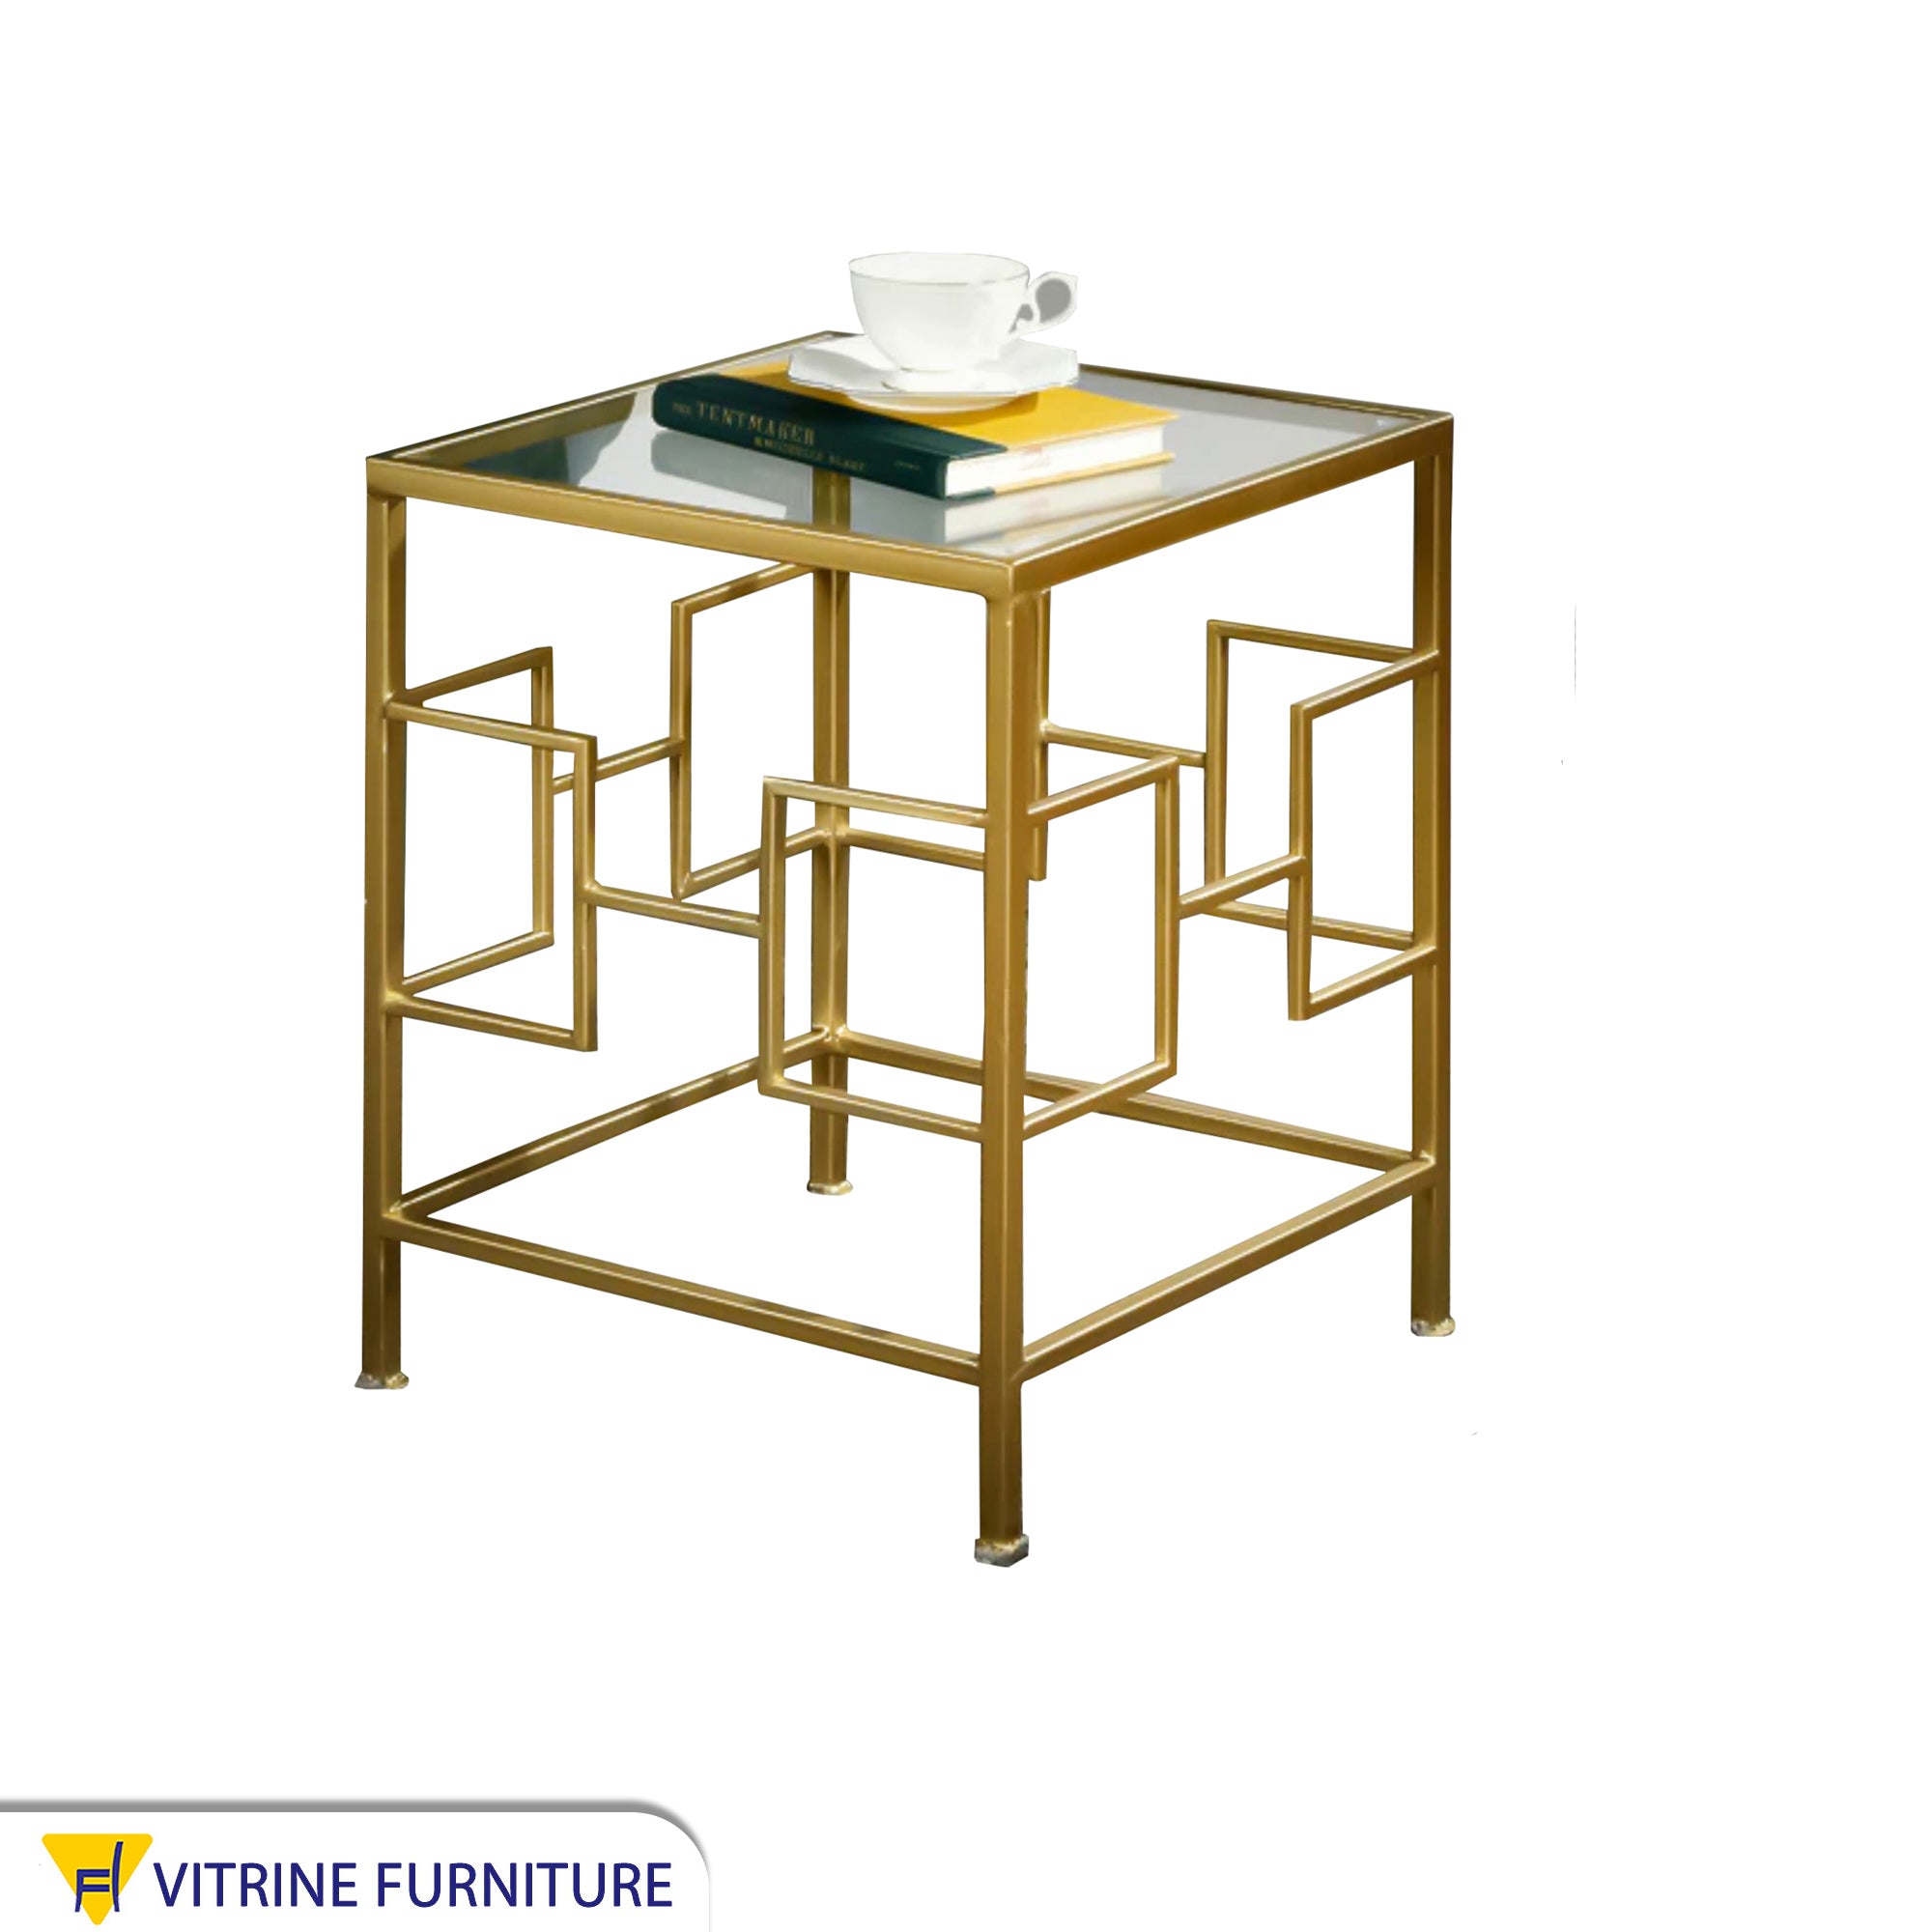 Square table with decorative metal frame